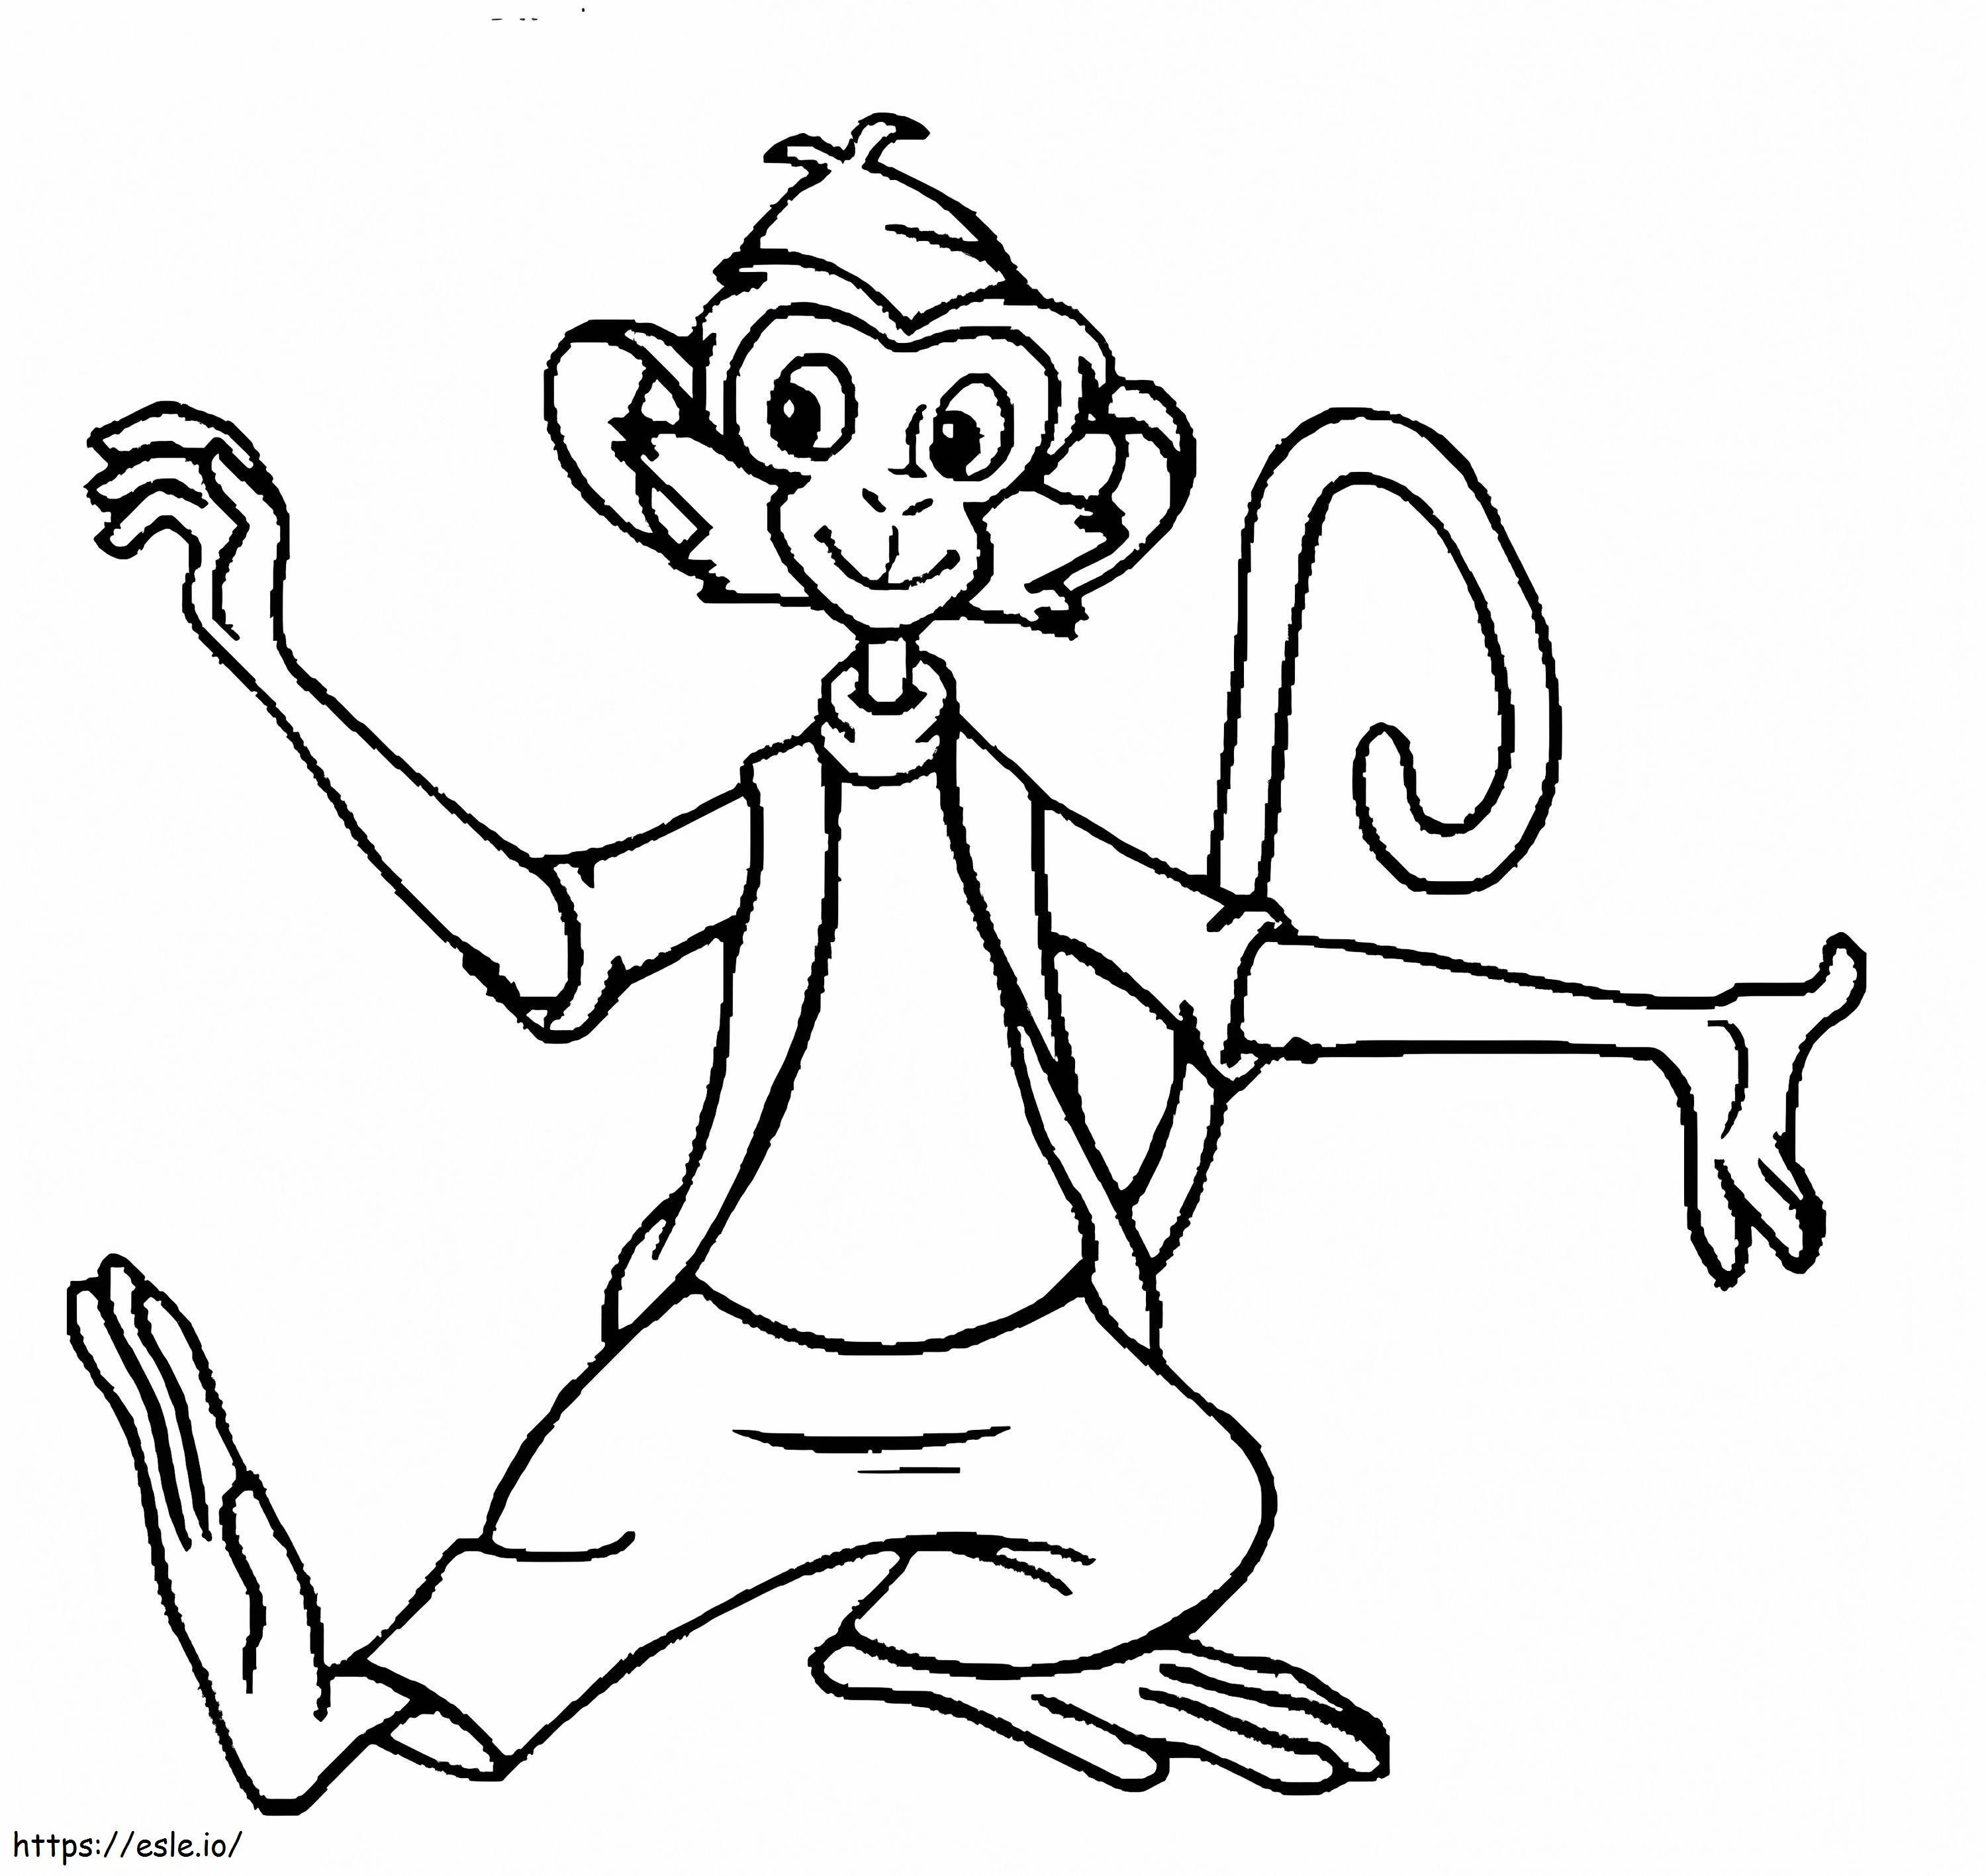 Monkey From Pippi Longstocking coloring page